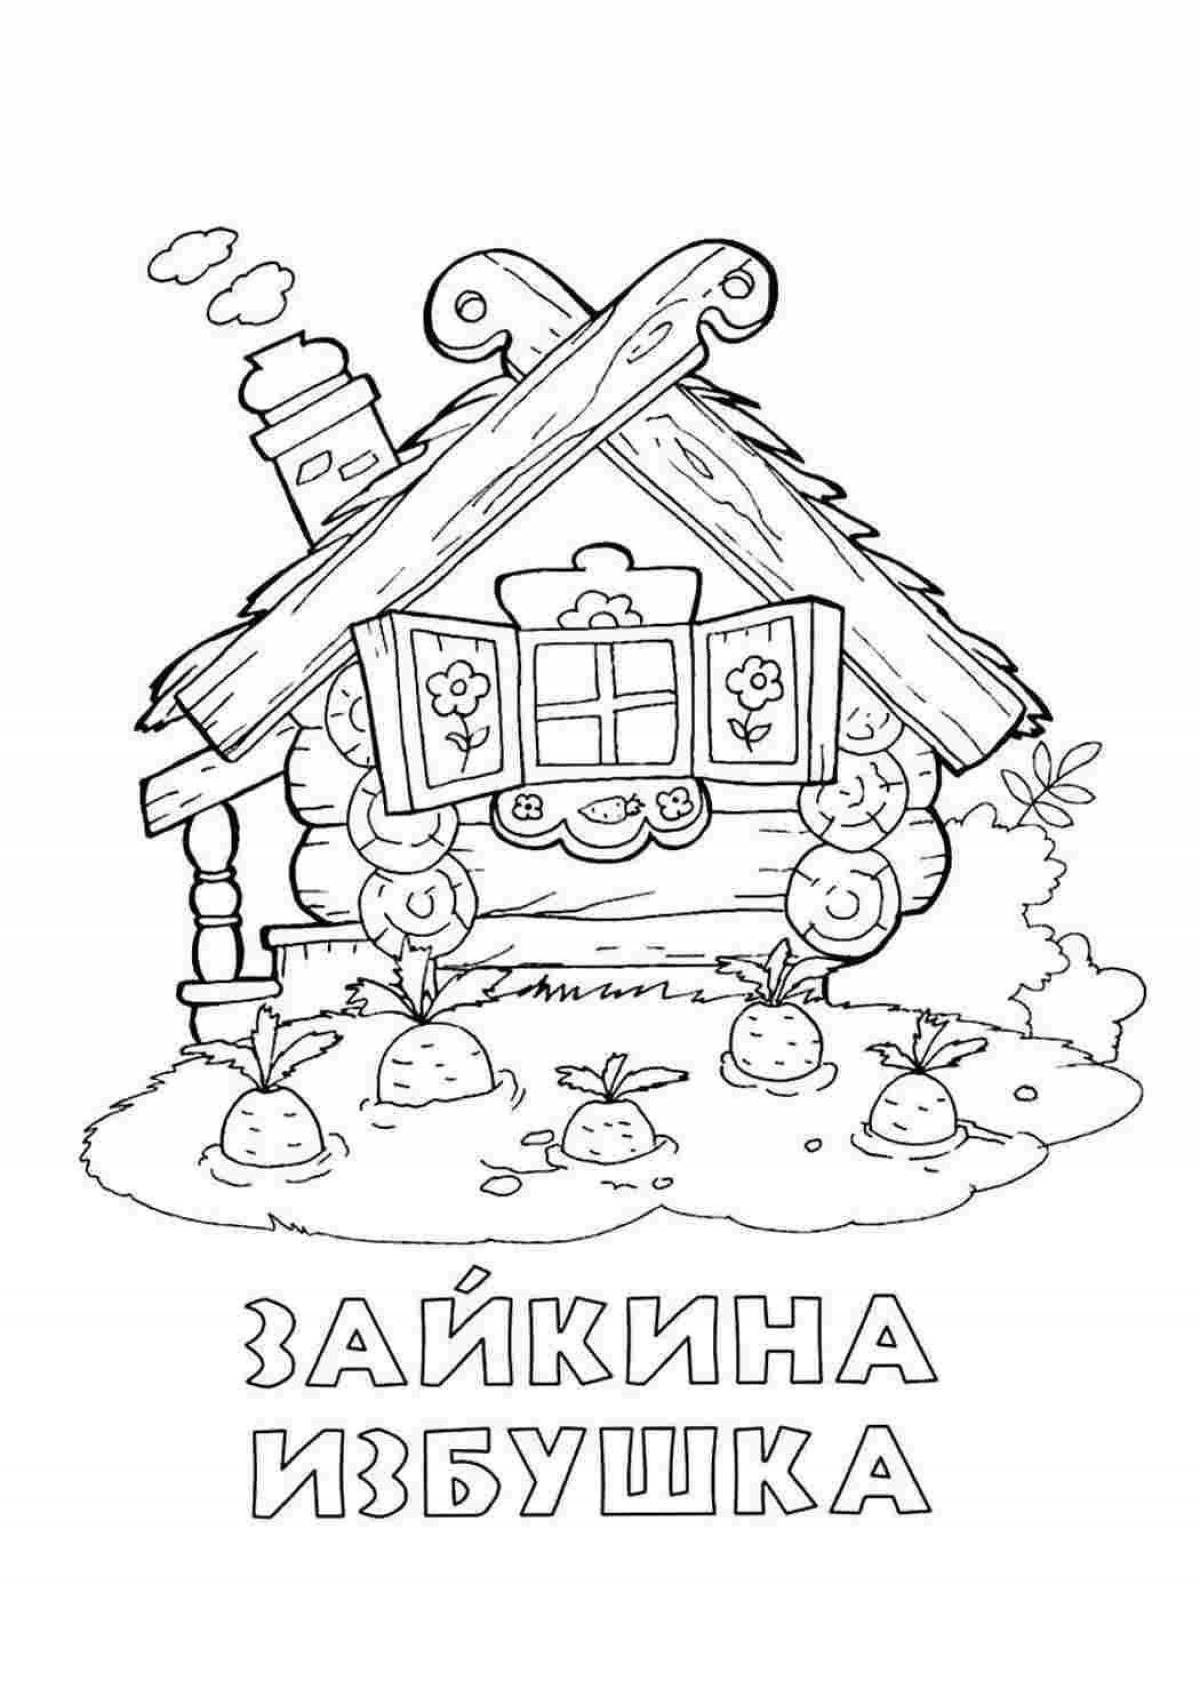 Colourful ice hut coloring page